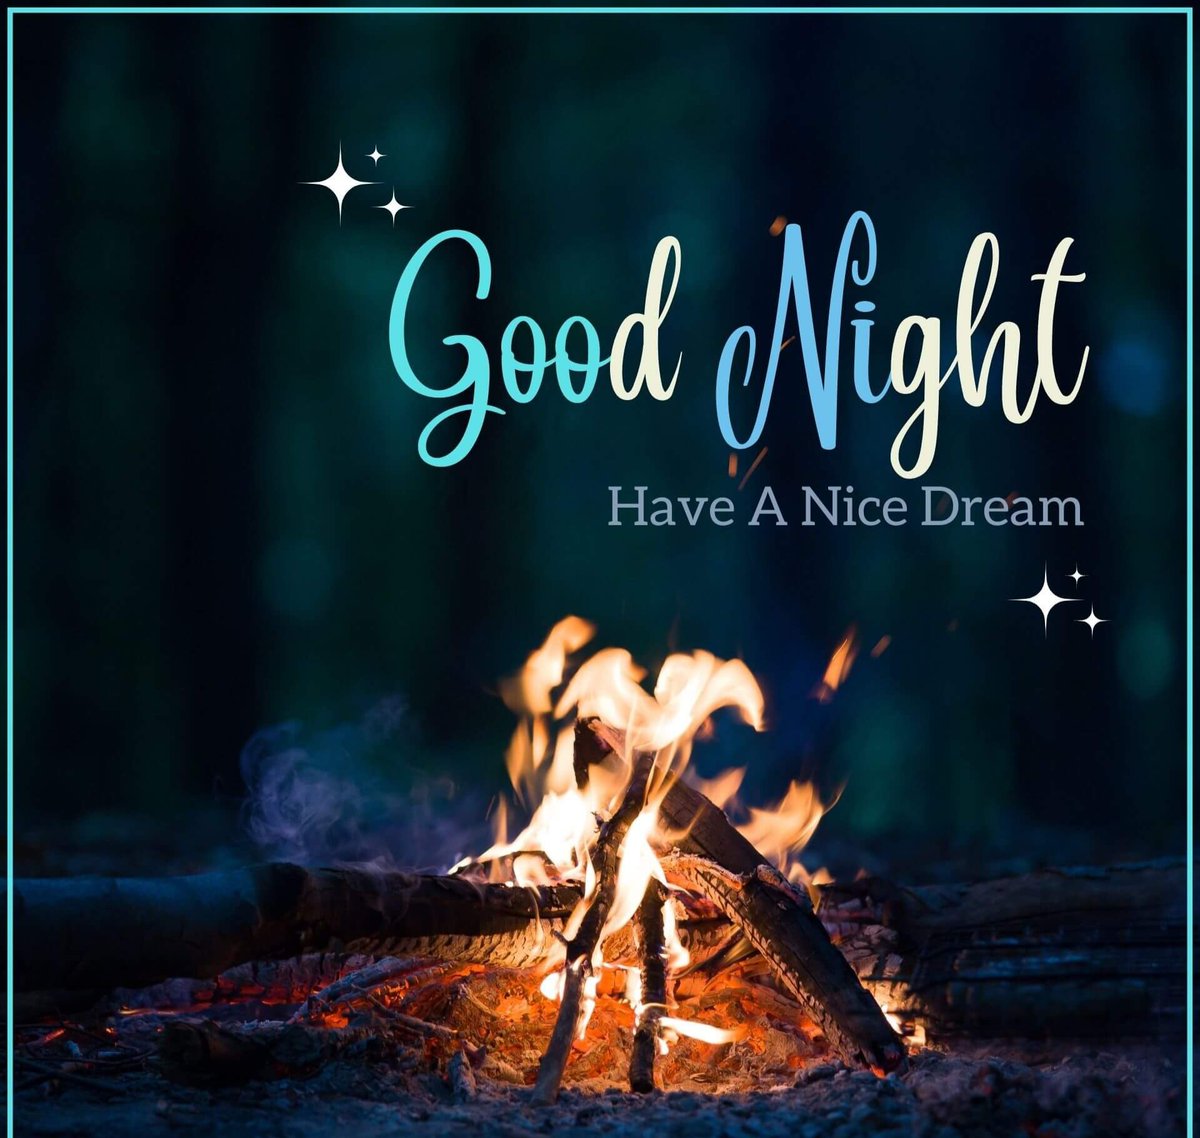 Wishing you a serene night filled with sweet dreams and peaceful slumber. May the stars above sprinkle tranquility on your dreams, and may you wake up refreshed for a new day. Good night, world! 🌙💤 #SweetDreams #GoodNight